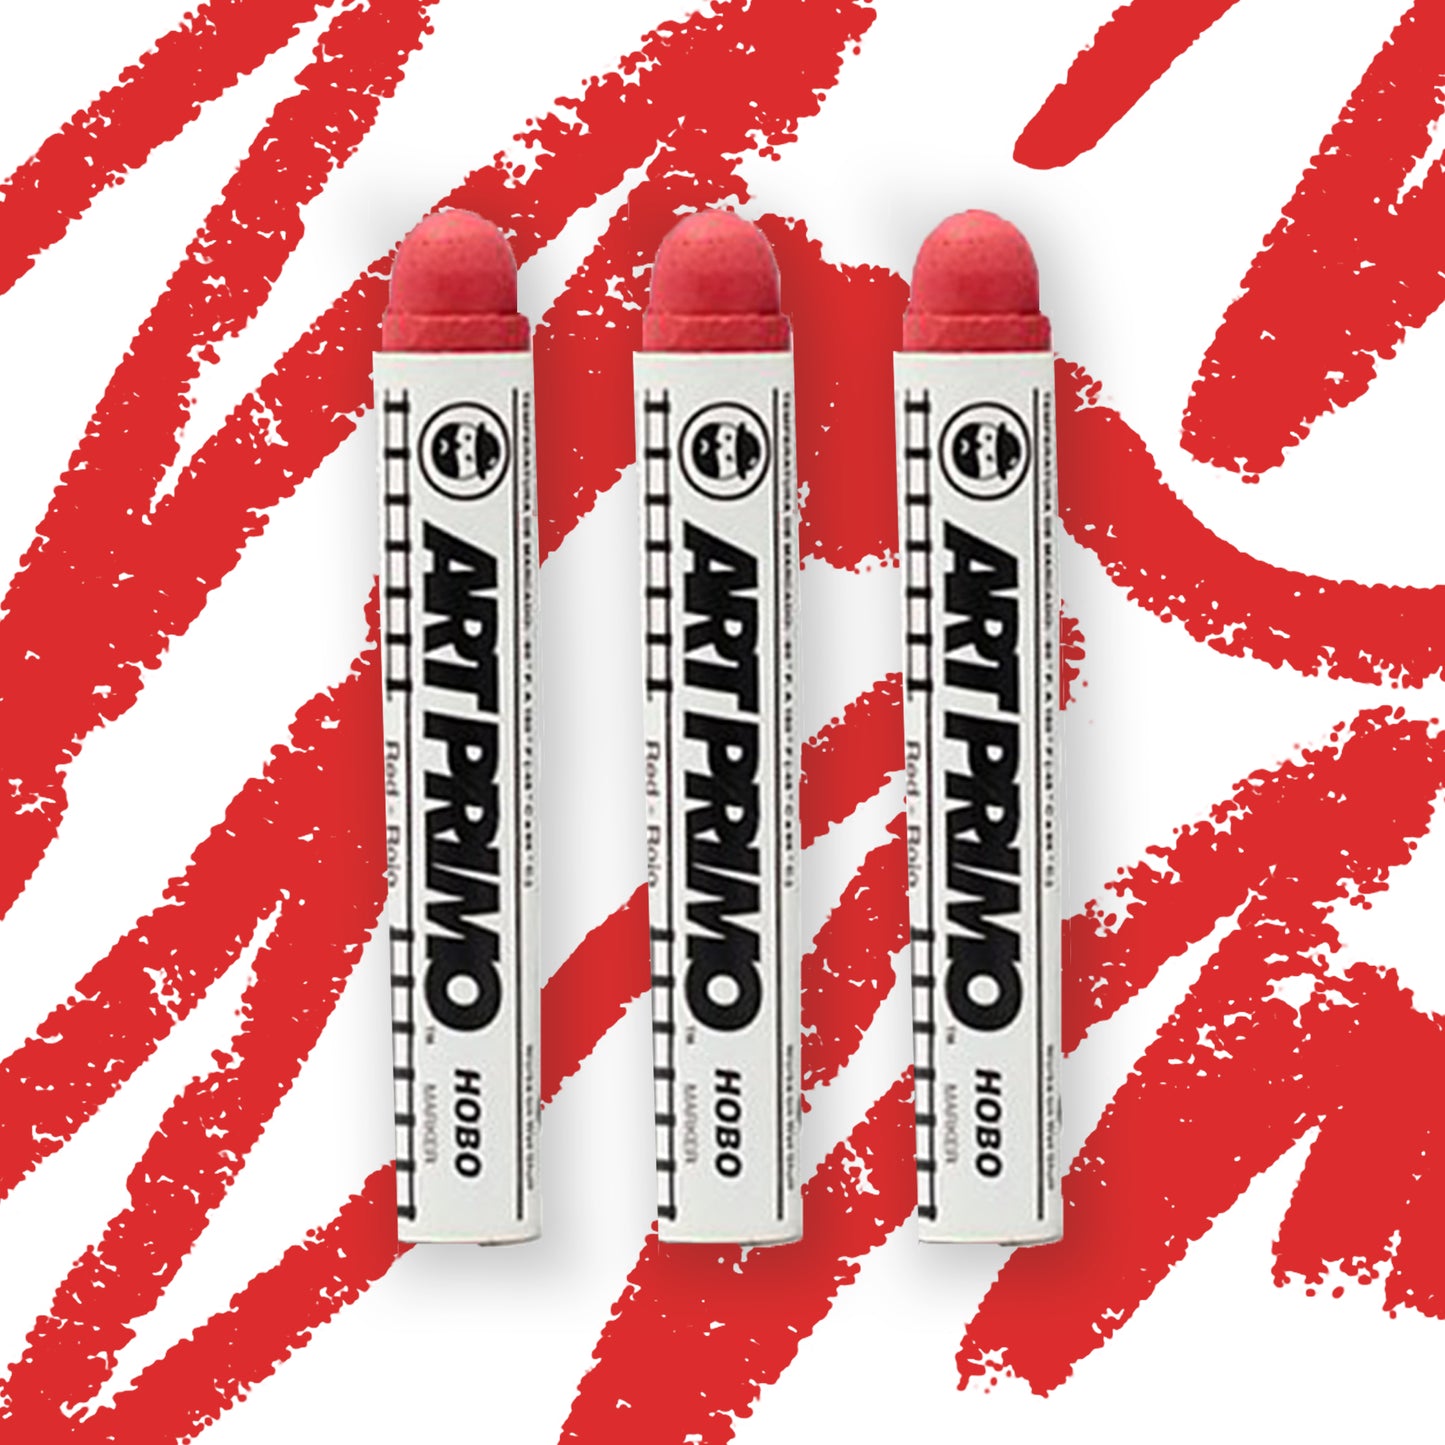 Three red crayon type markers with a white label reading "Art Primo"